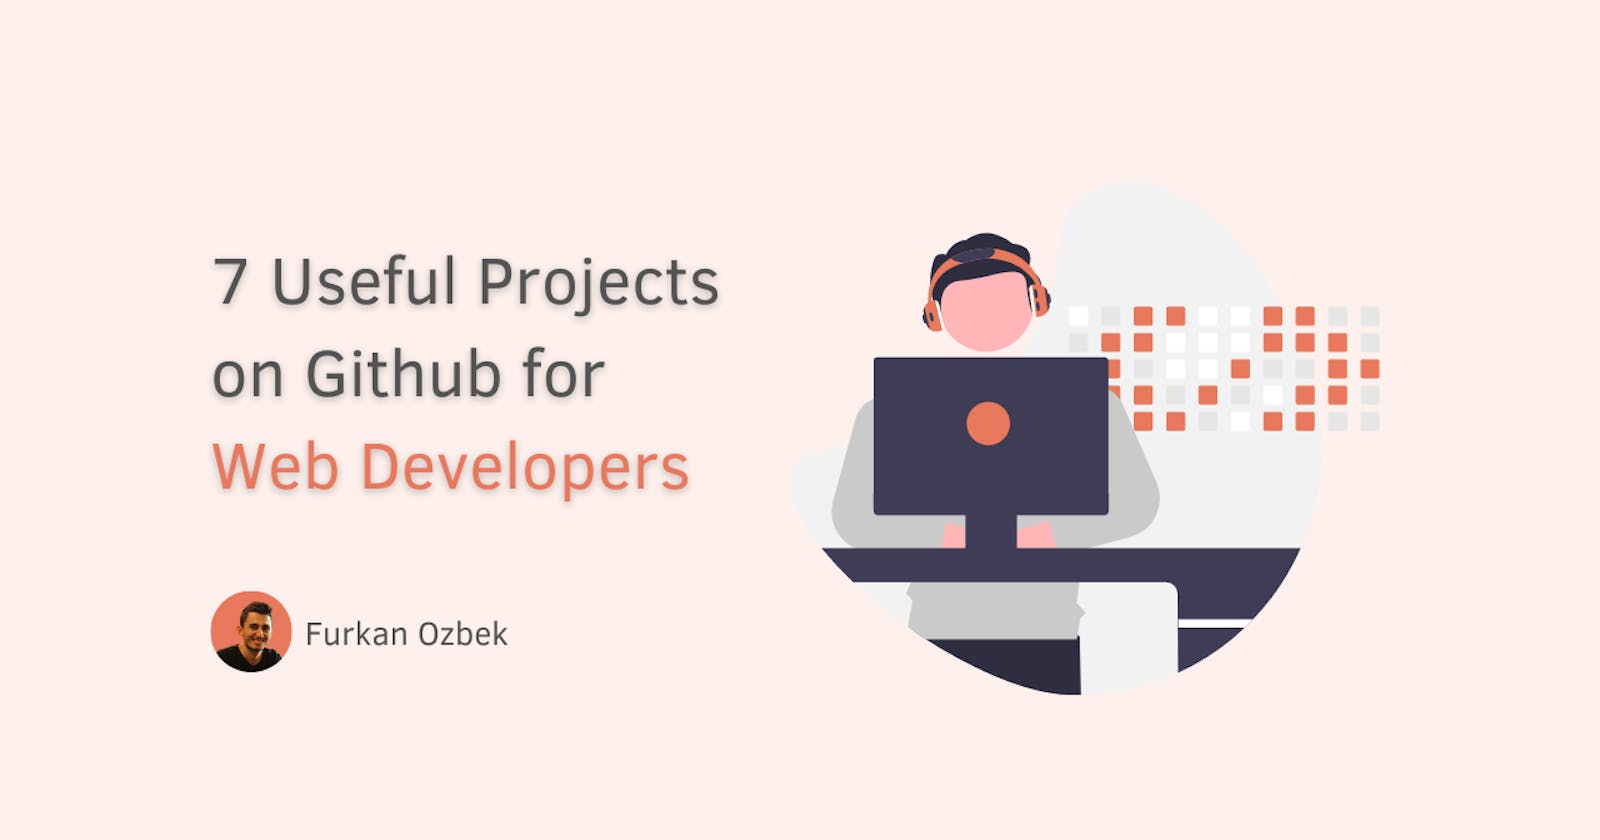 7 Useful Projects on Github for Web Developers